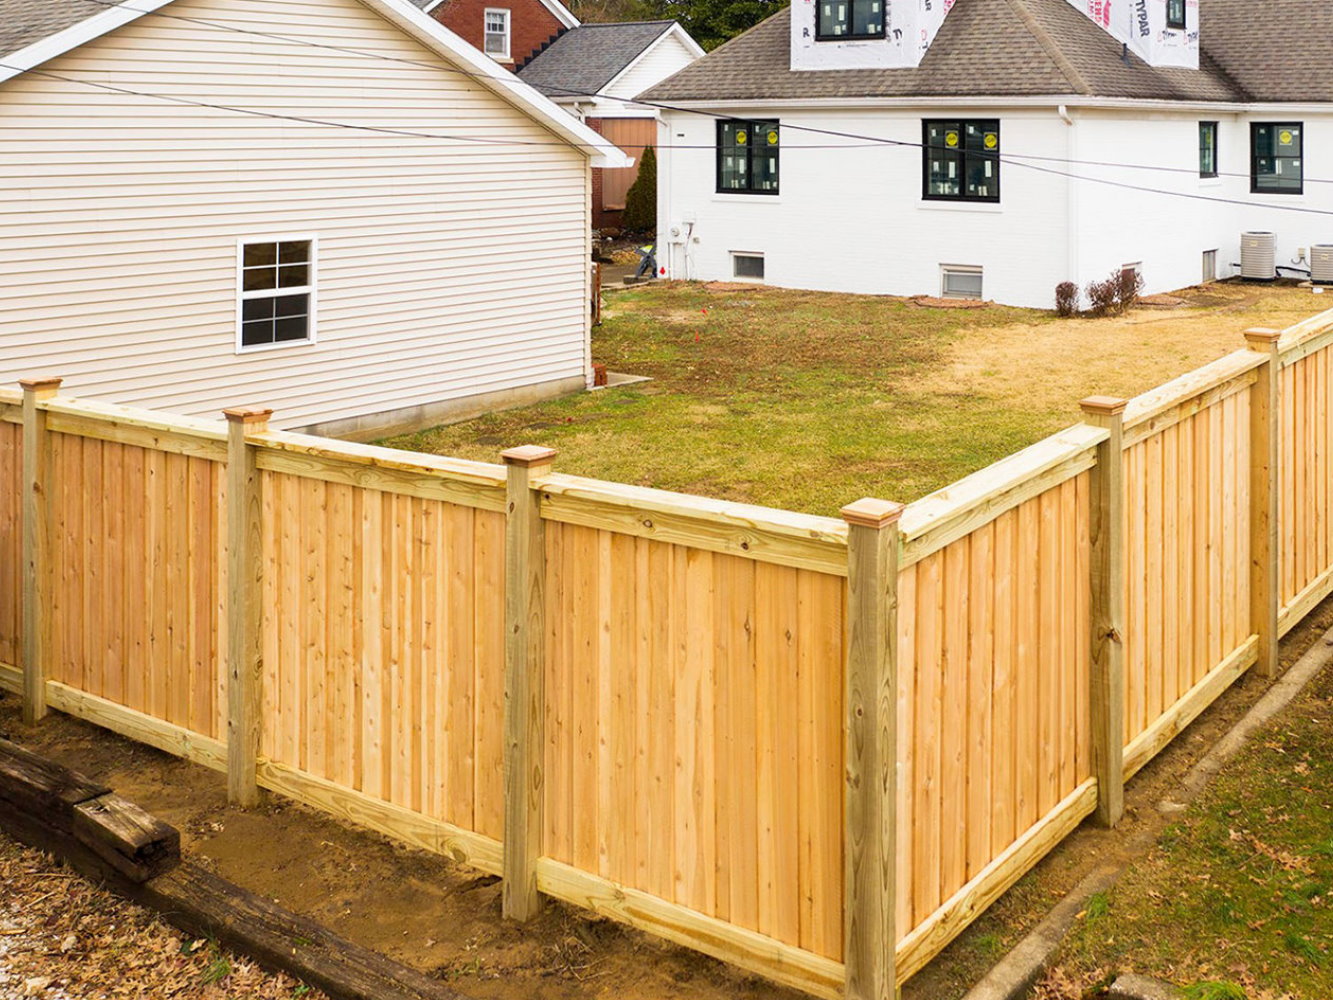 Crossville IL cap and trim style wood fence